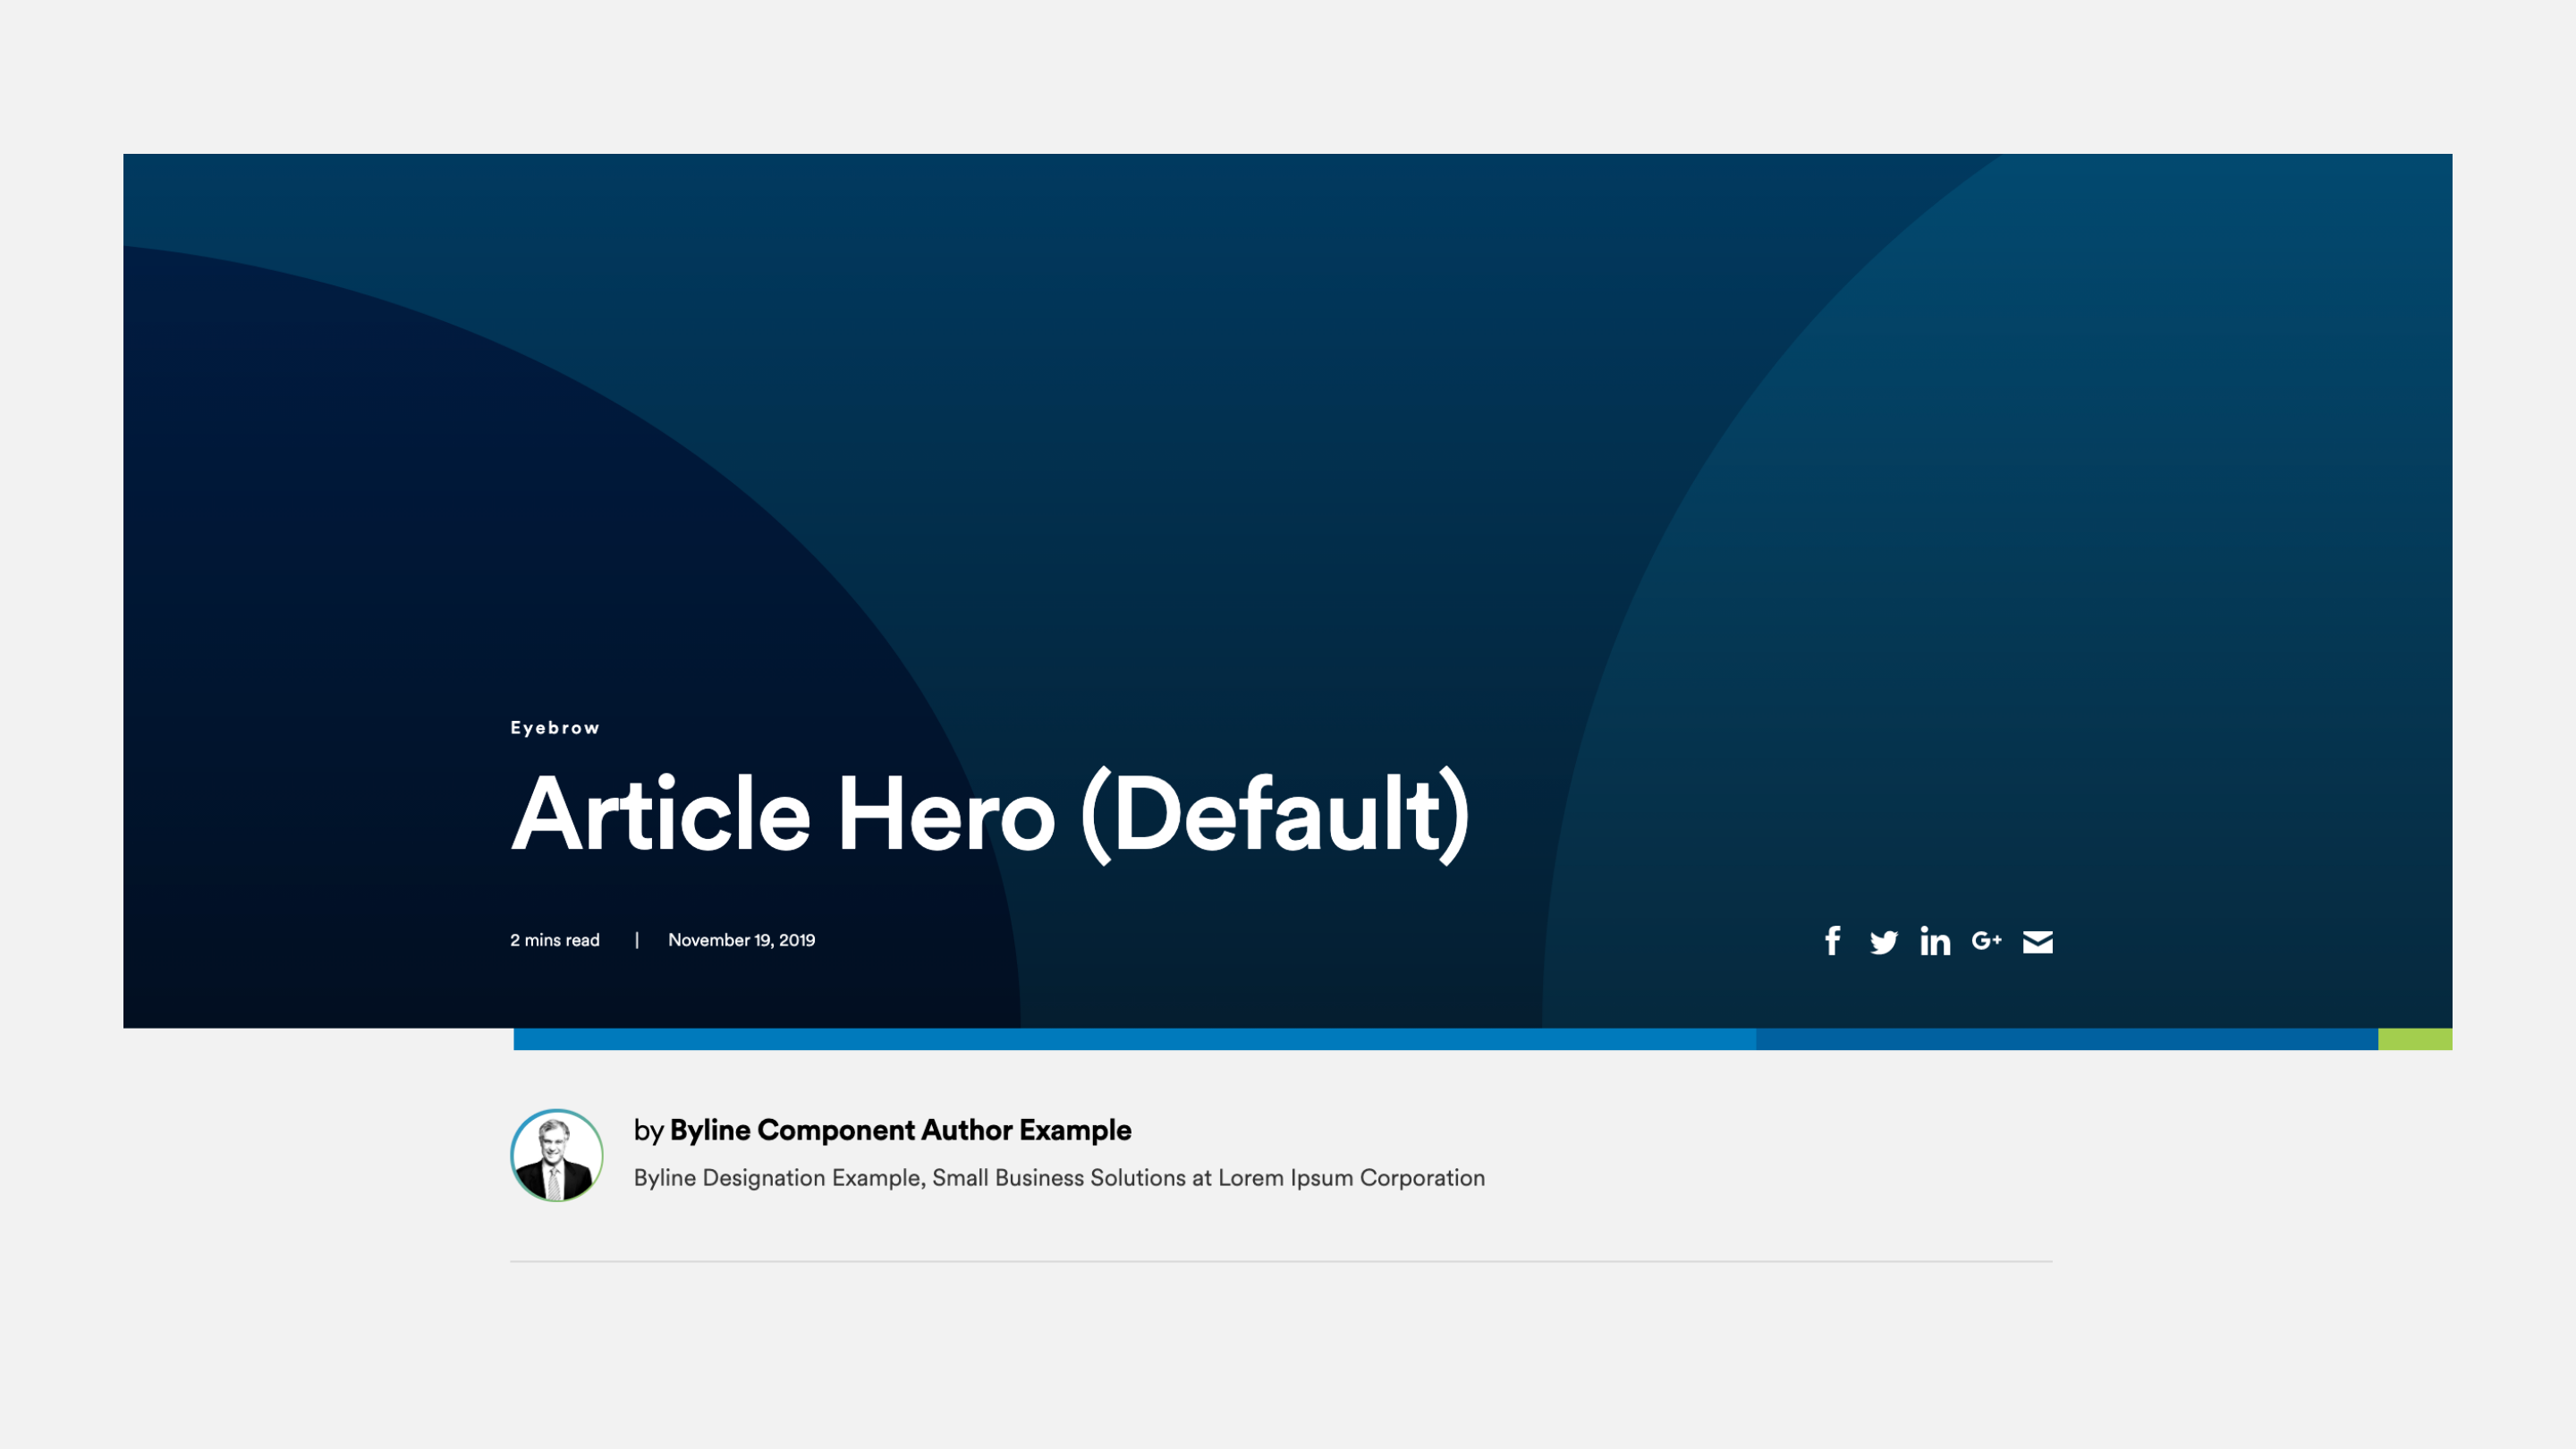 Article Hero - Default with Byline